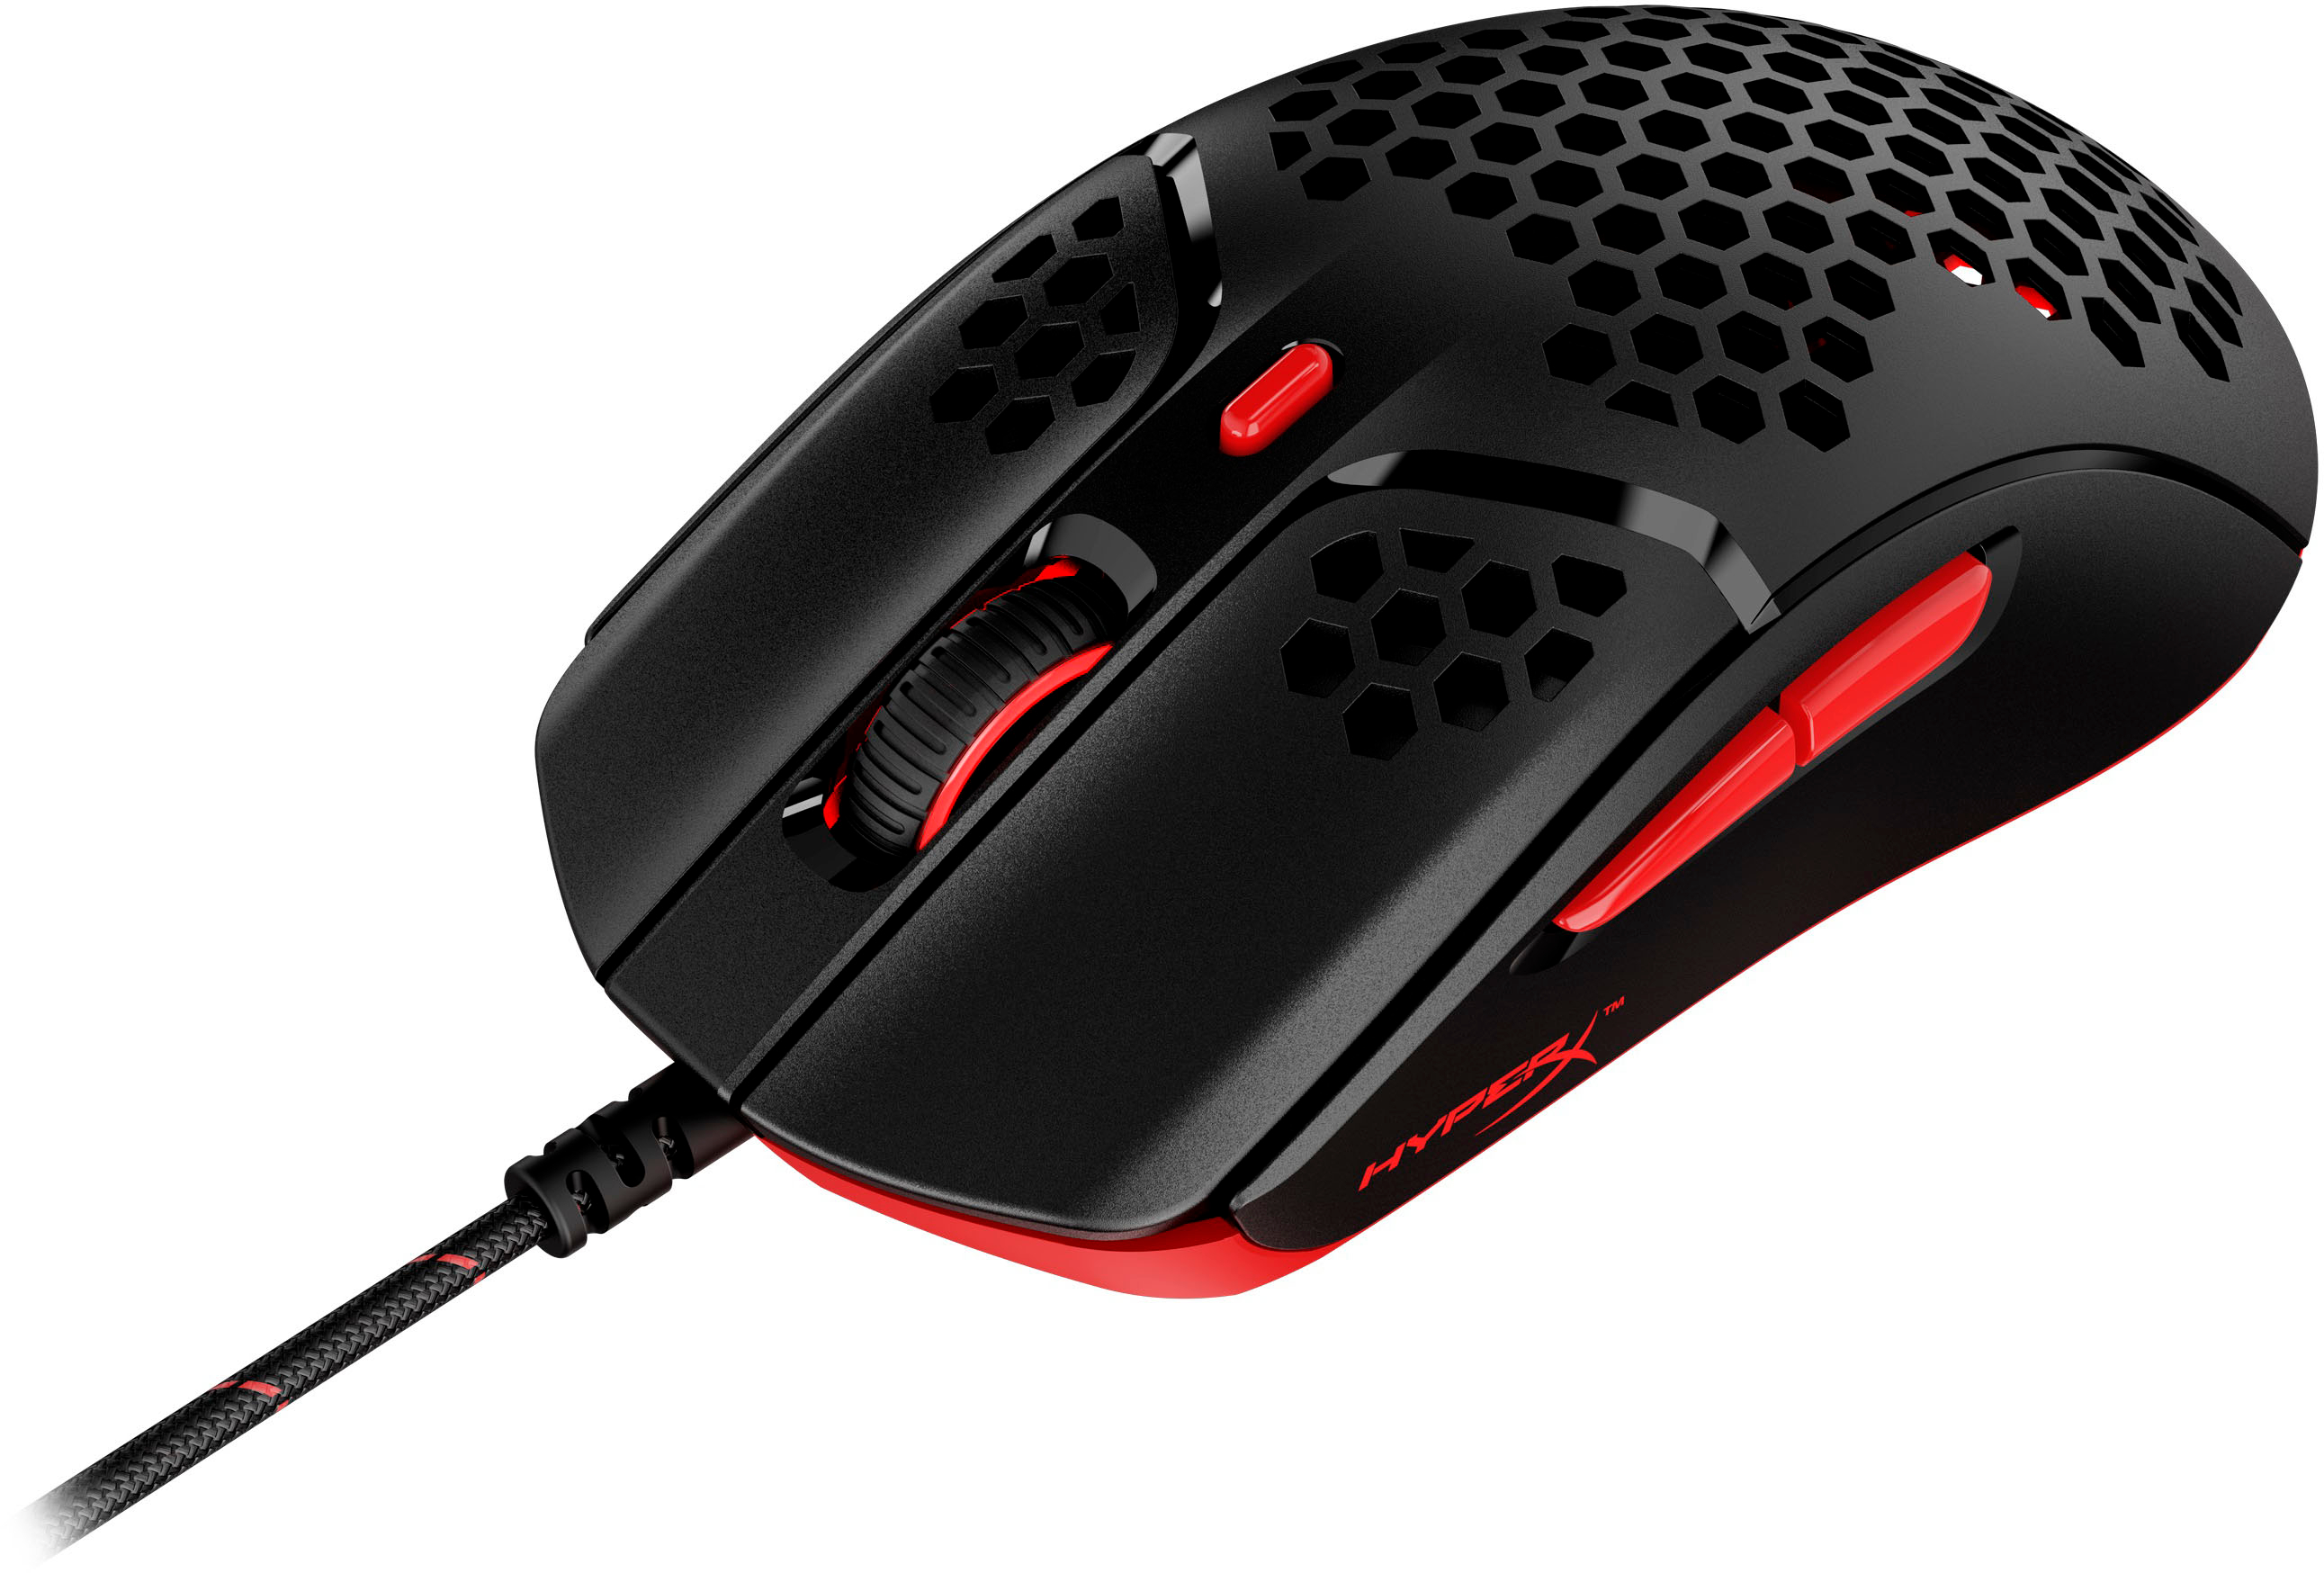 Back View: HyperX - Pulsefire Haste Lightweight Wired Optical Gaming Right-handed Mouse with RGB Lighting - Black and red